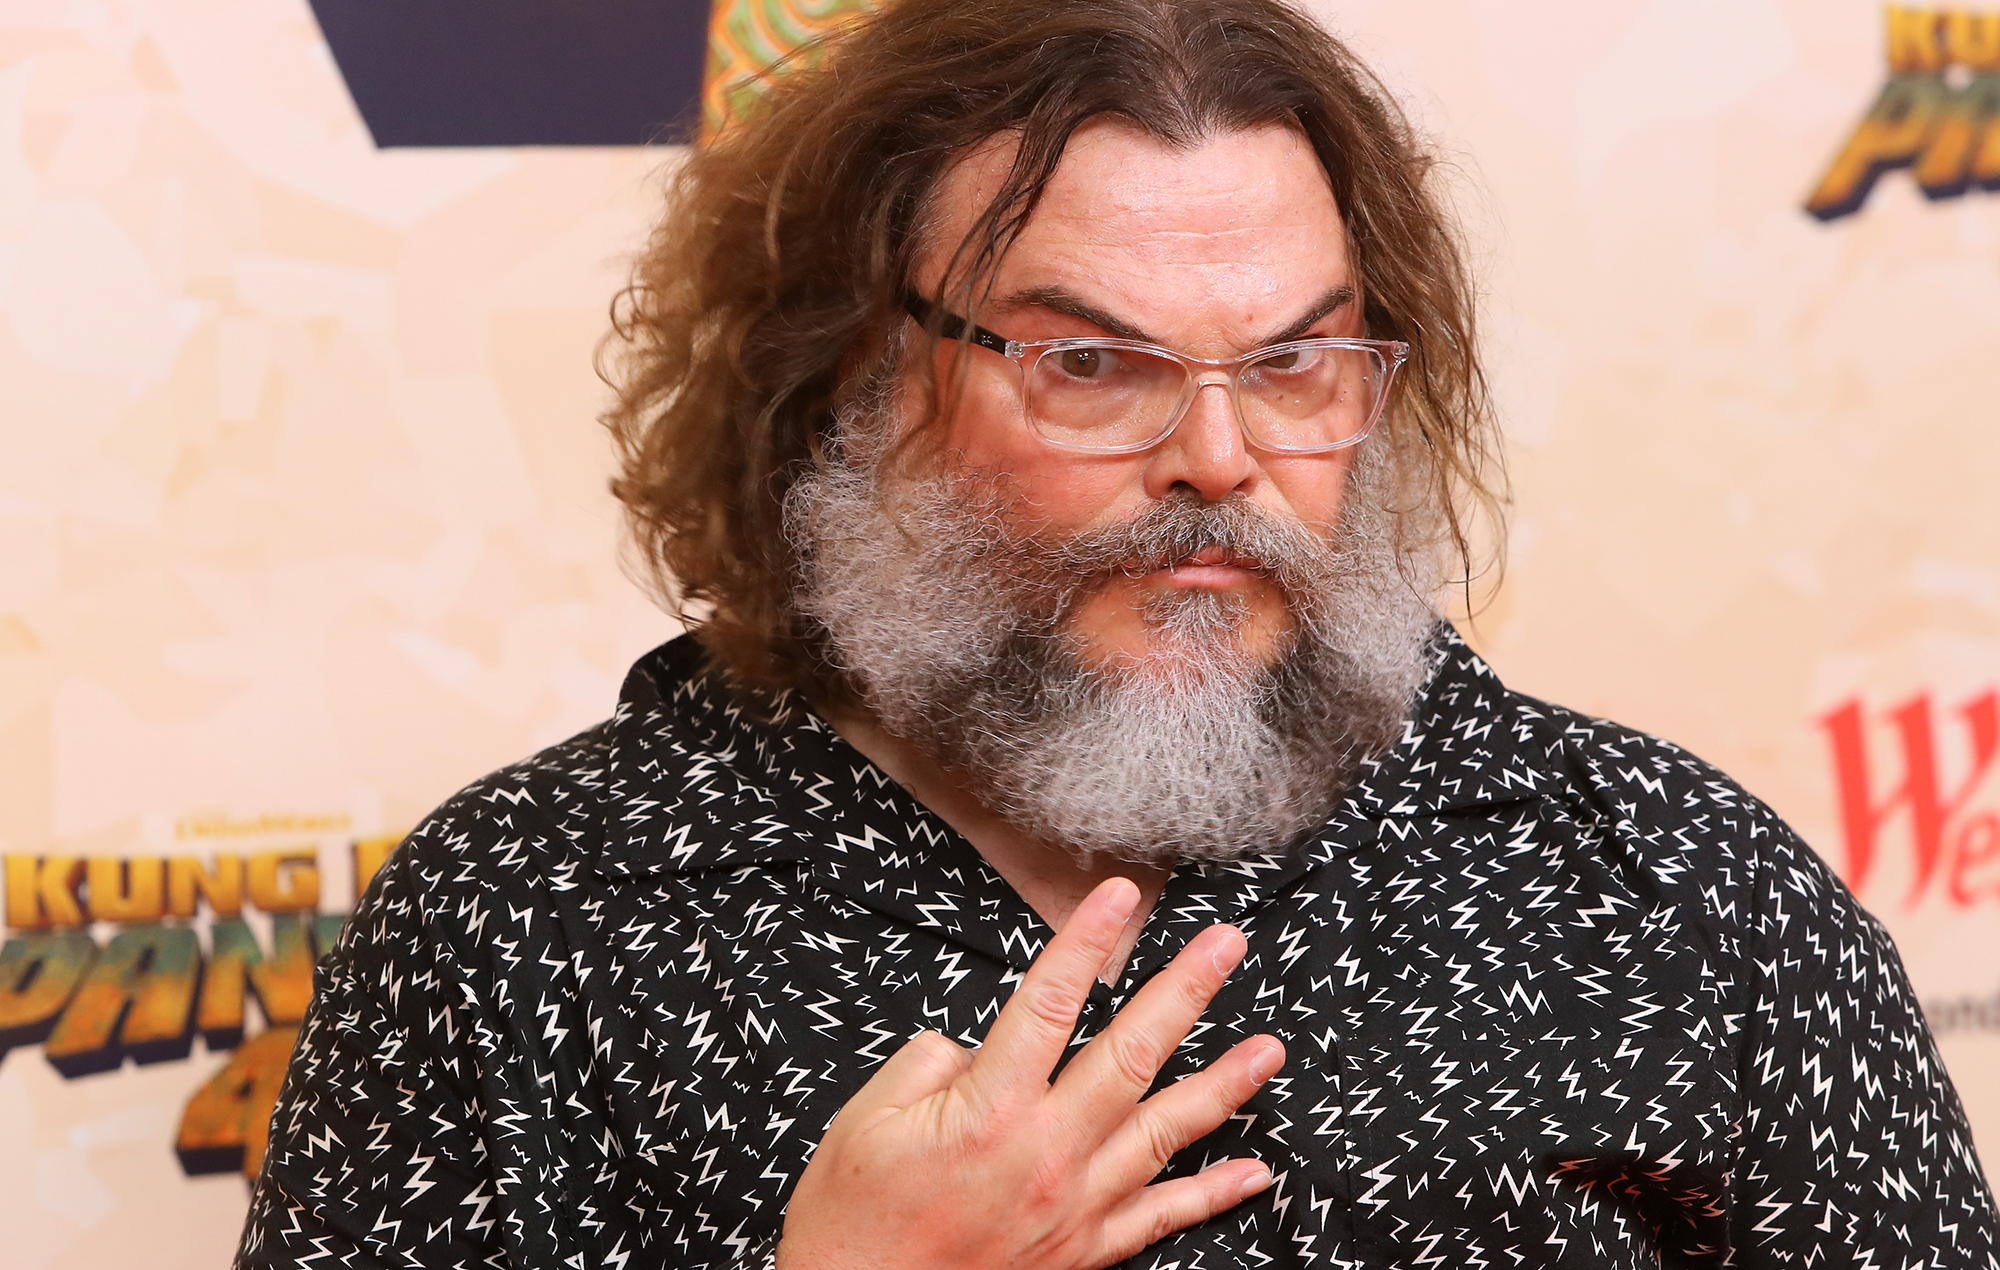 Jack Black abused by Trump supporters for endorsing Biden: “Used to like Jack Black – never again”